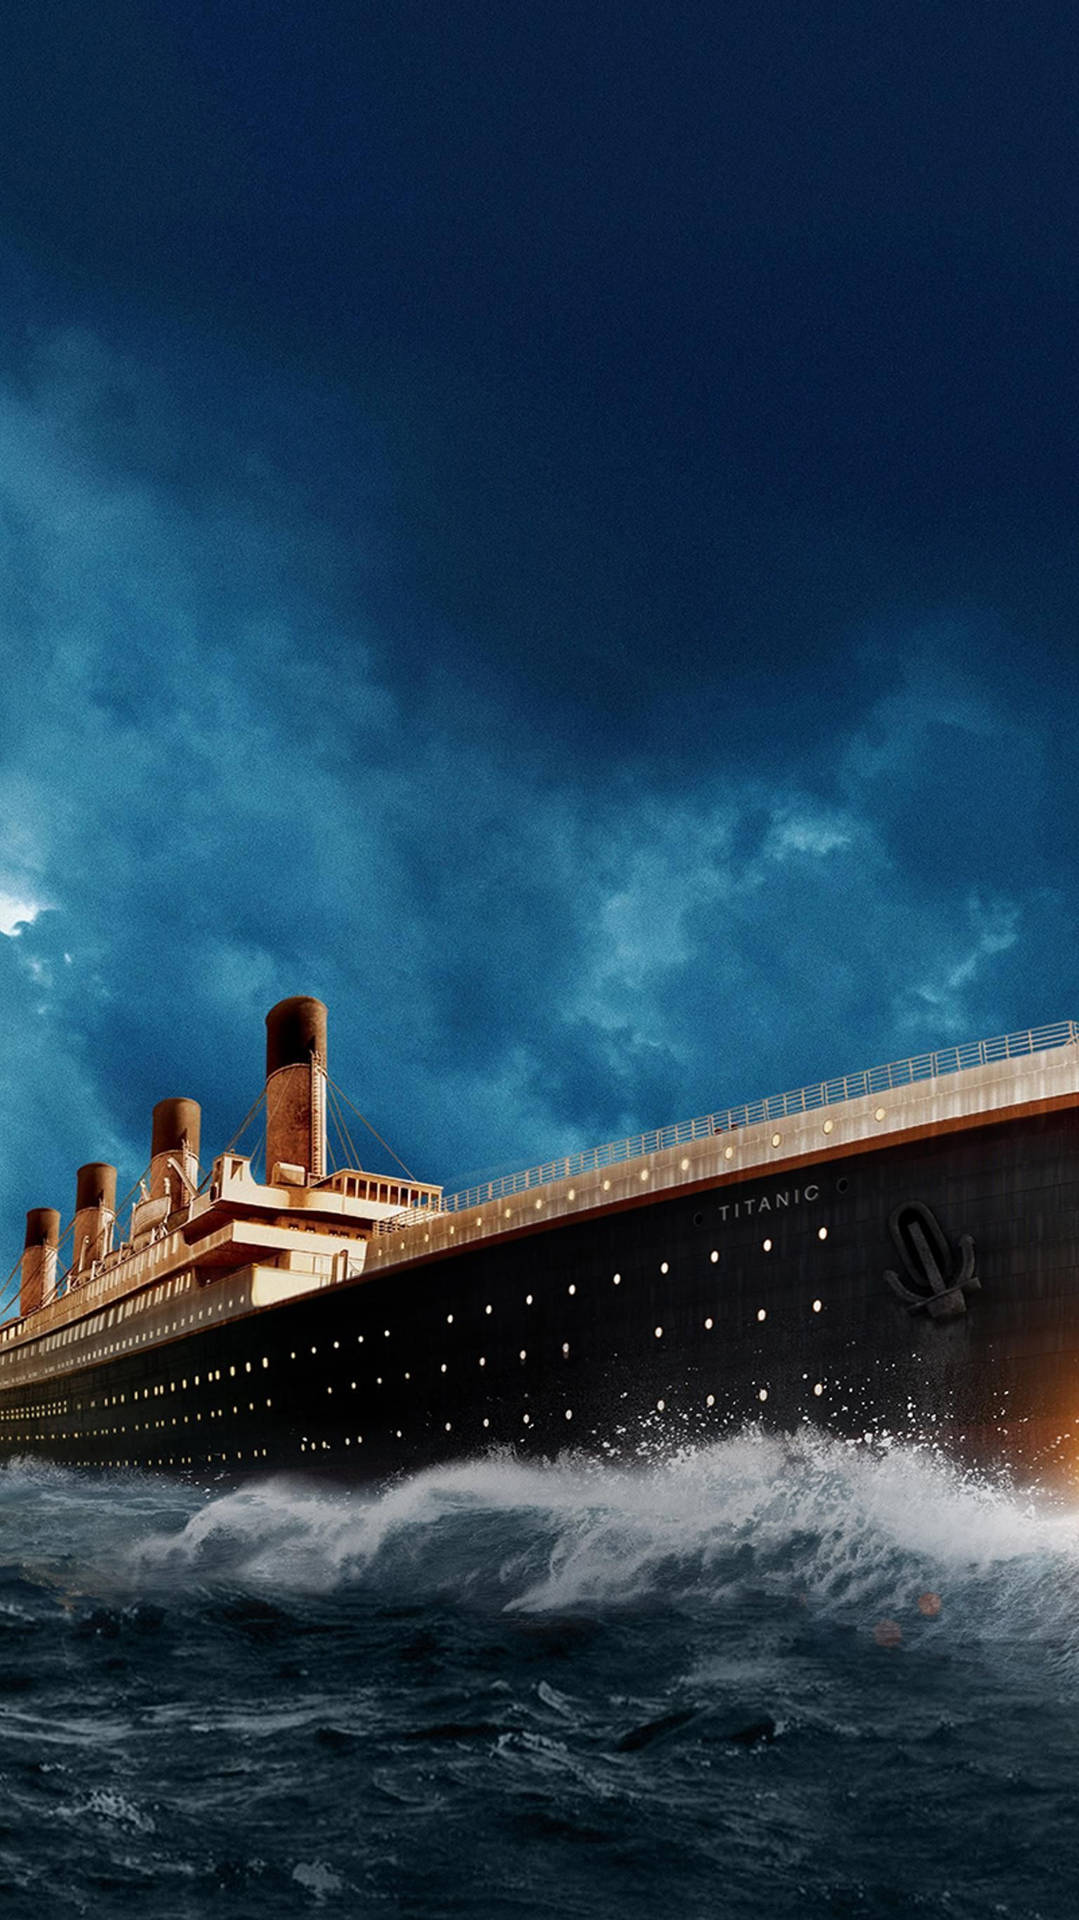 Titanic In The Storm Wallpaper